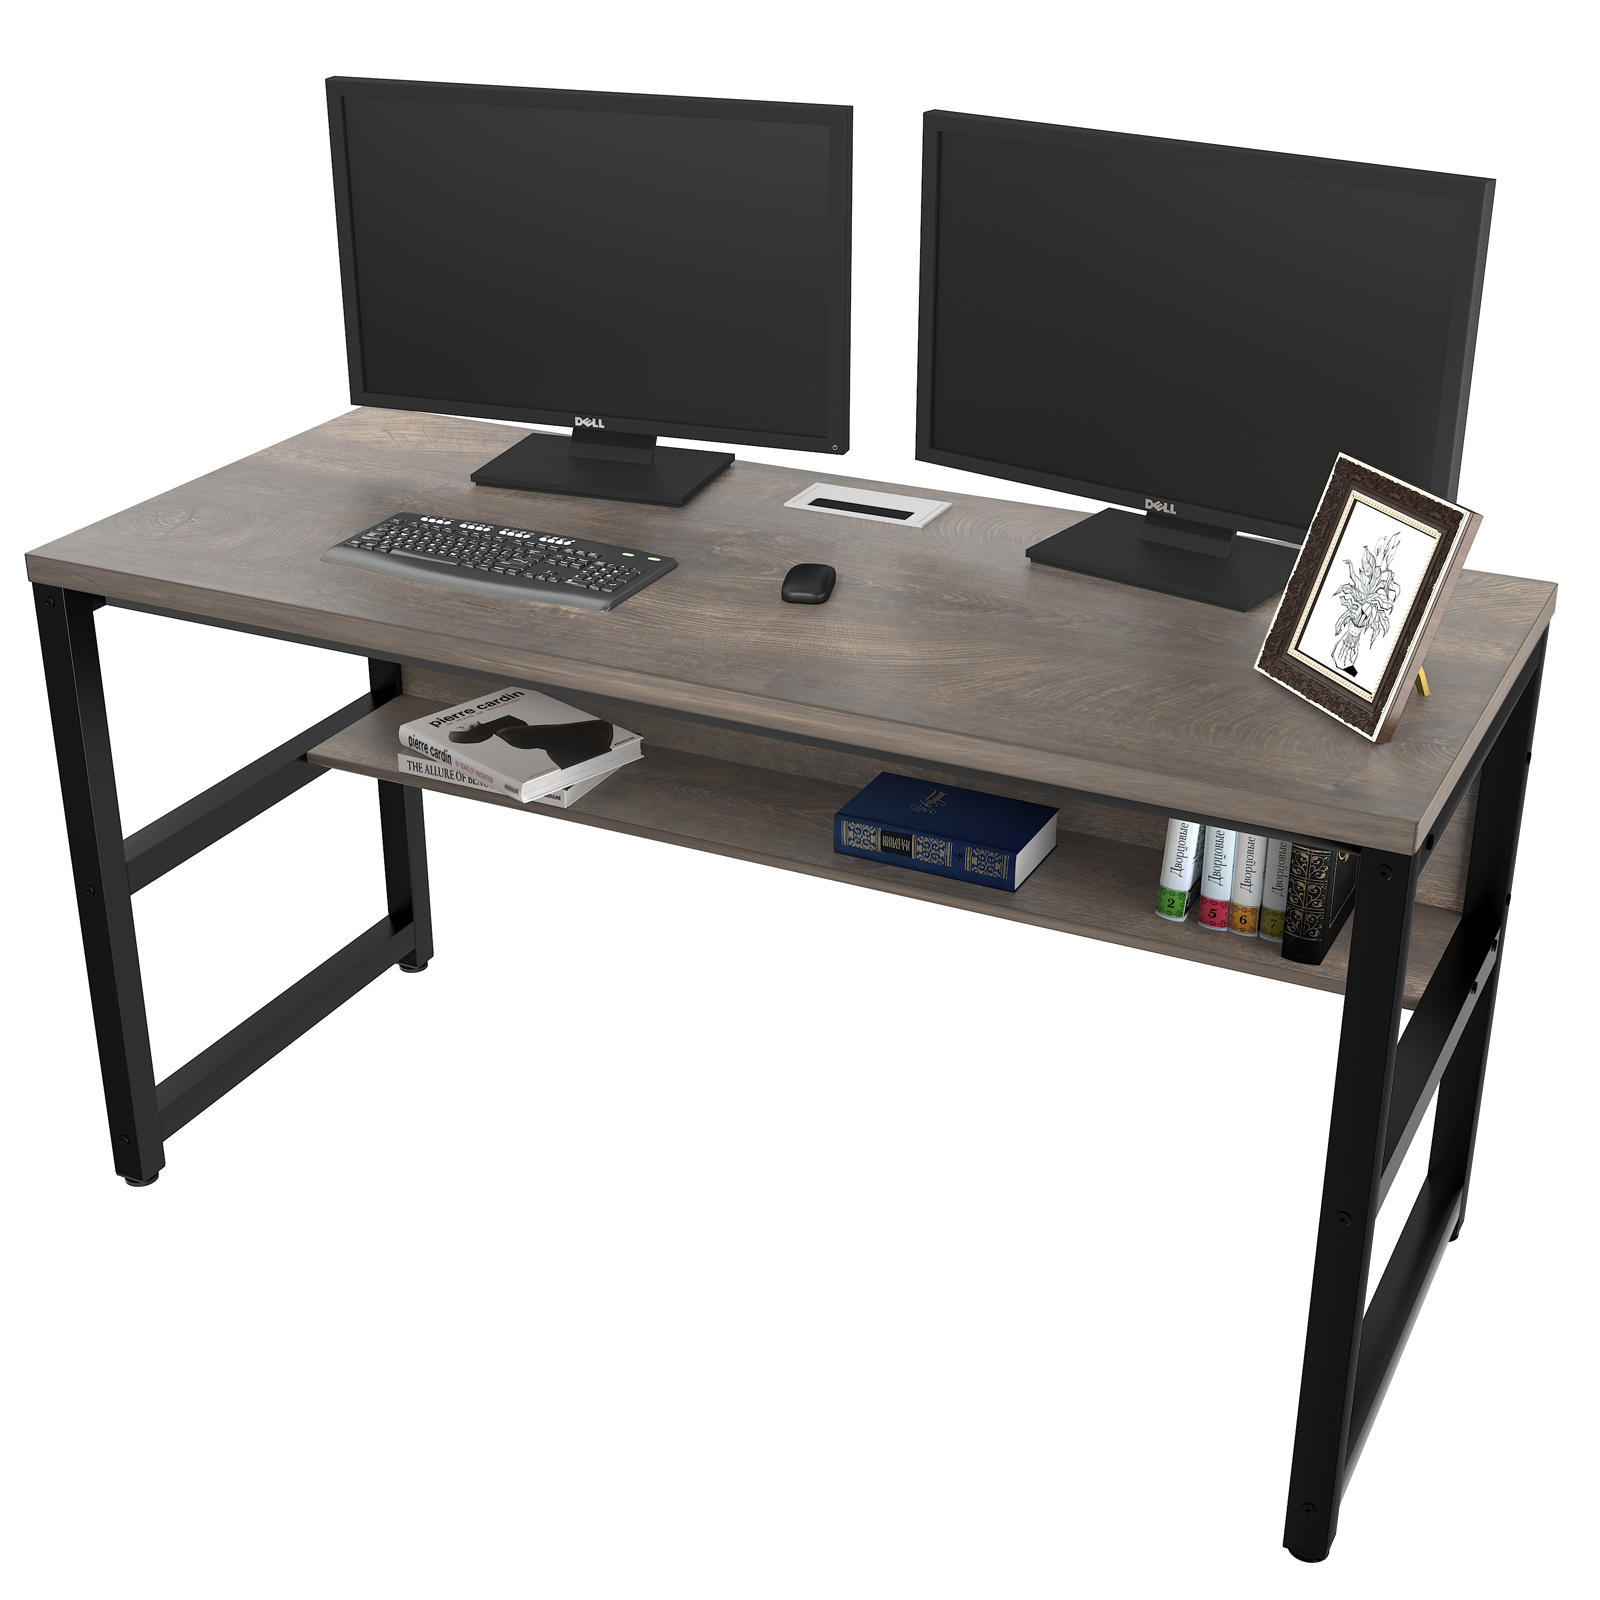 TOPSKY 55" Computer Desk with Bookshelf/Metal Hole Cable Cover 1.18" Thick Desk CT-8025